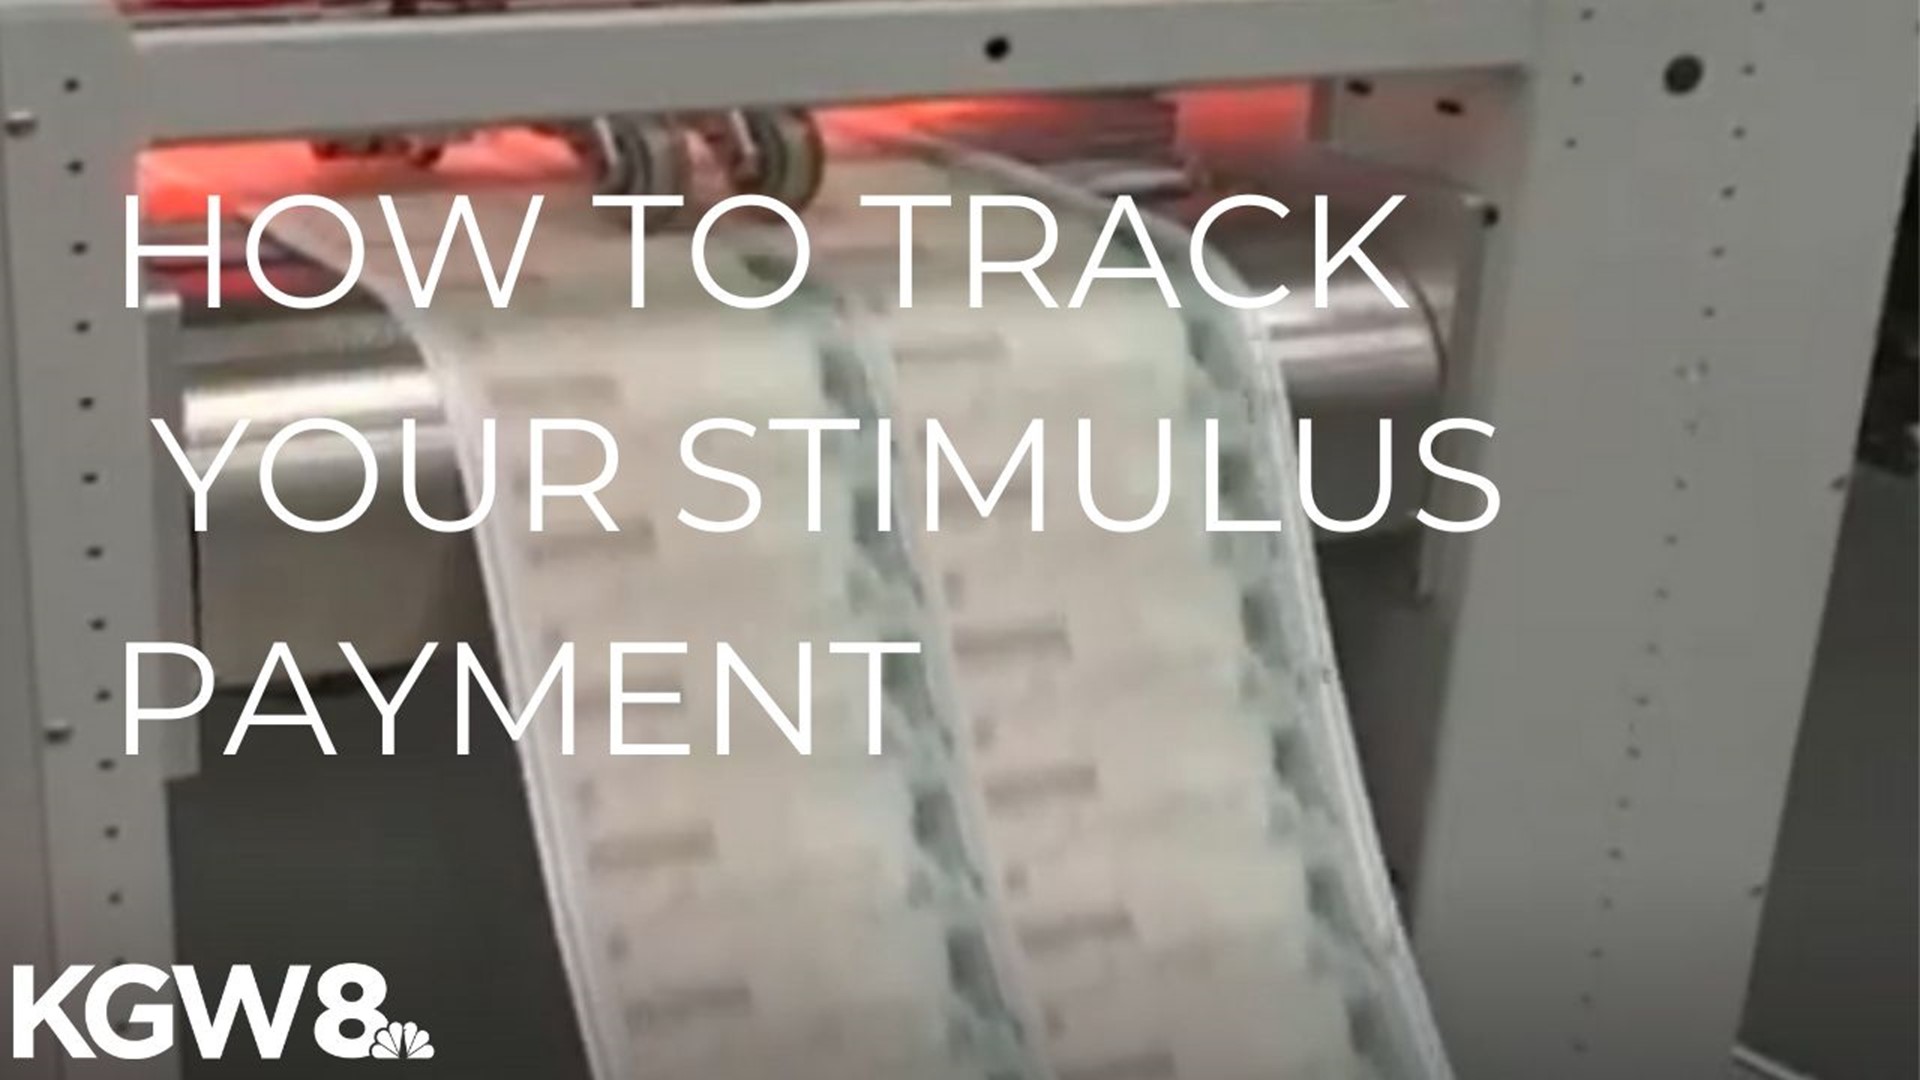 Didn’t receive your stimulus check yet? Here’s how to track your payment.